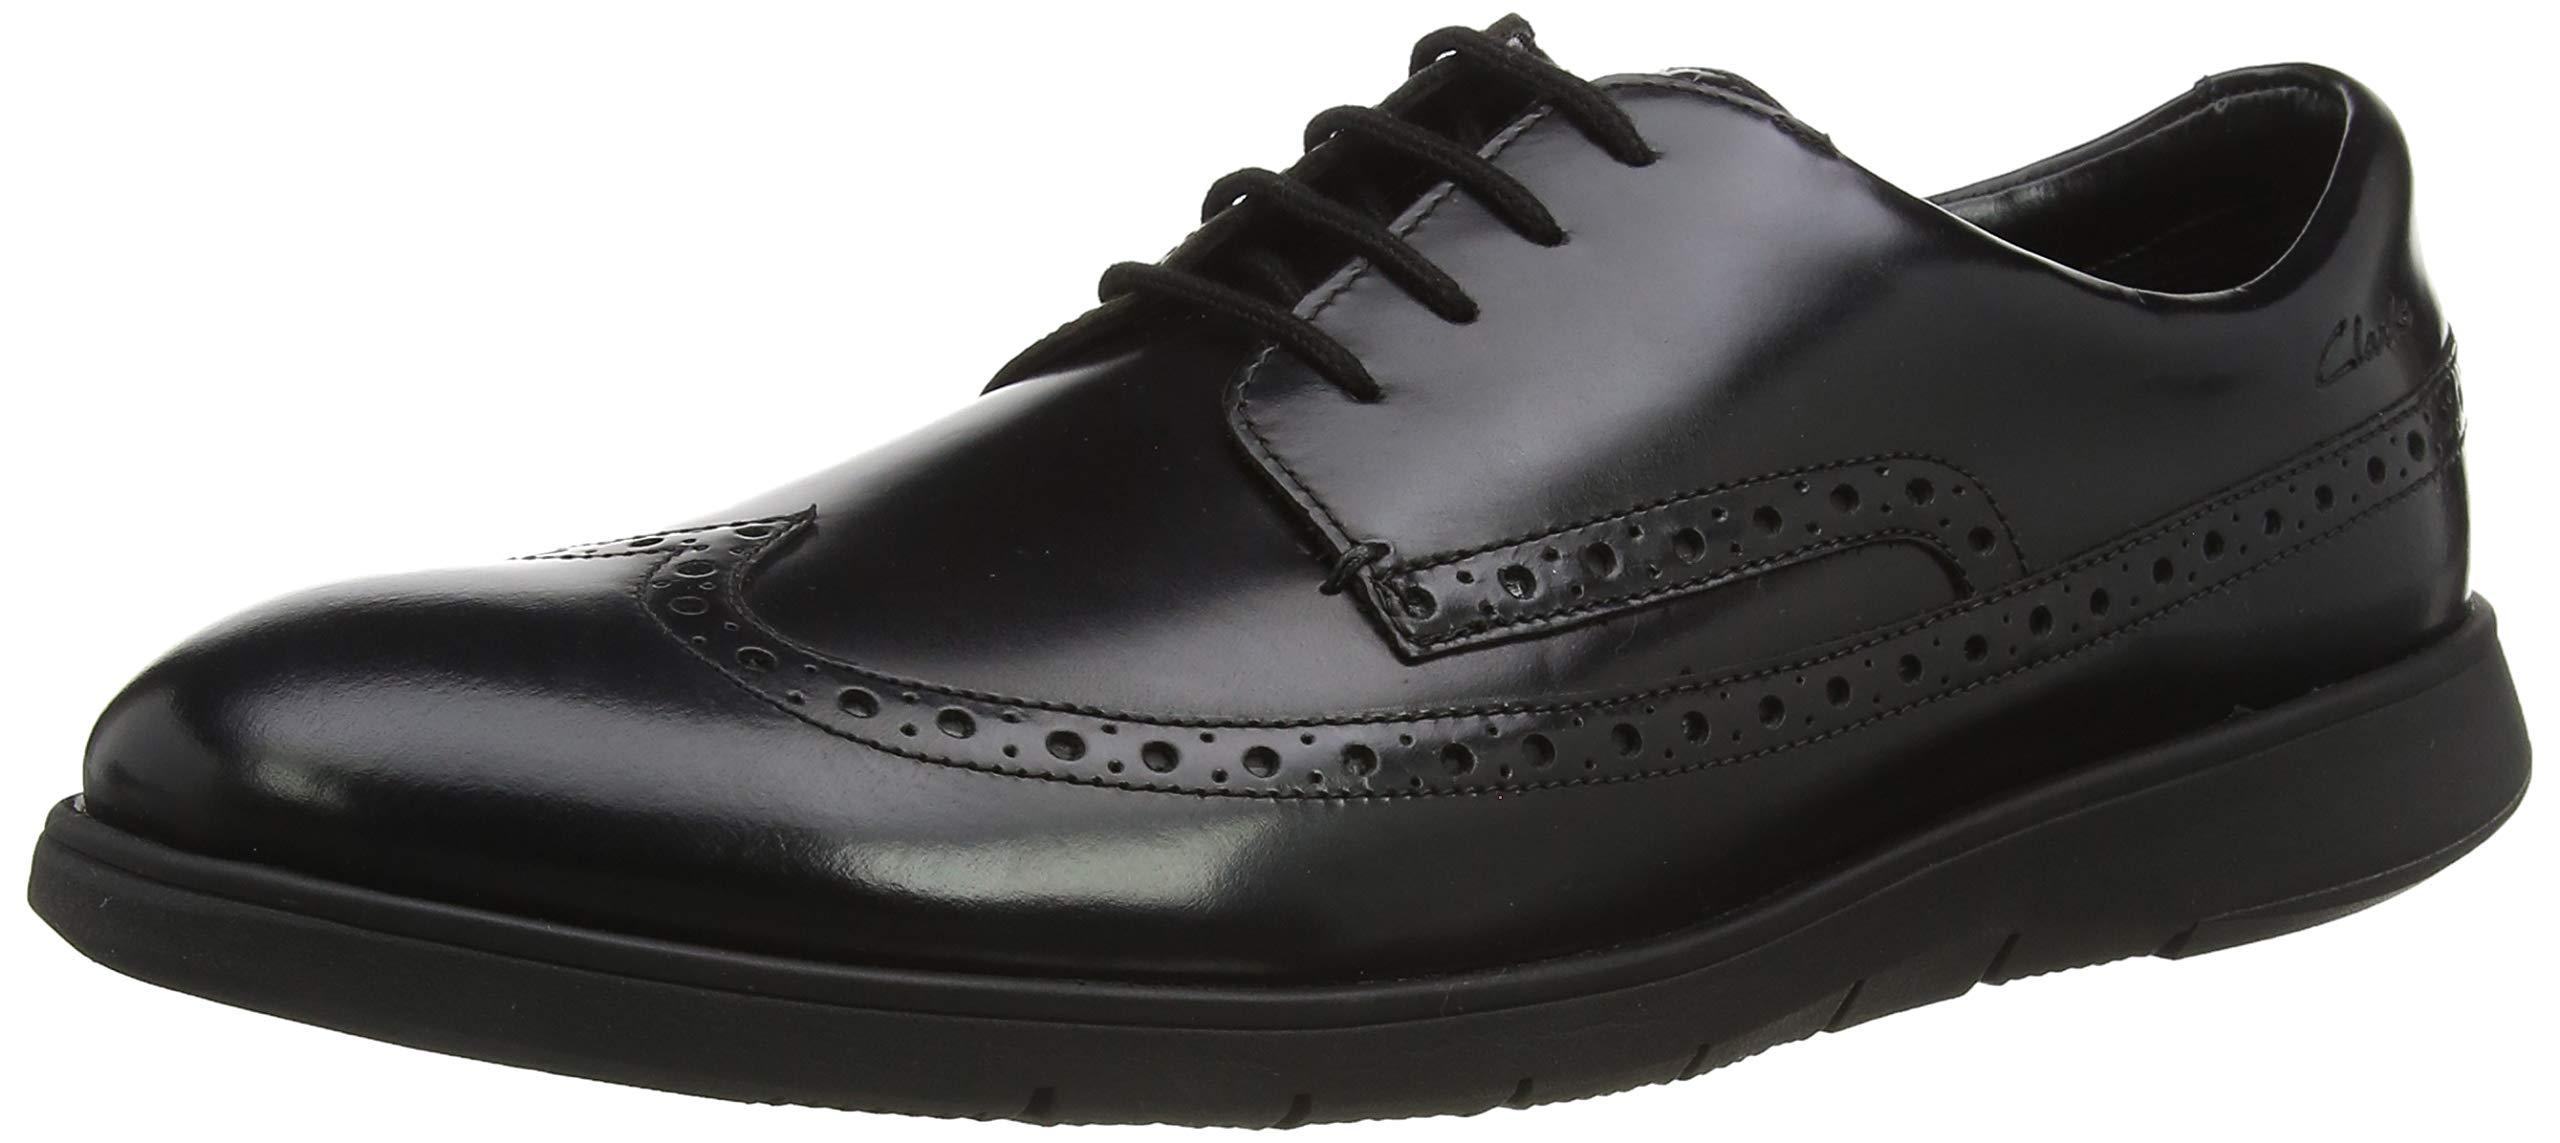 Clarks Leather Helston Limit Mens Casual Brogue Shoes in Black for Men Mens Shoes Lace-ups Oxford shoes Save 61% 